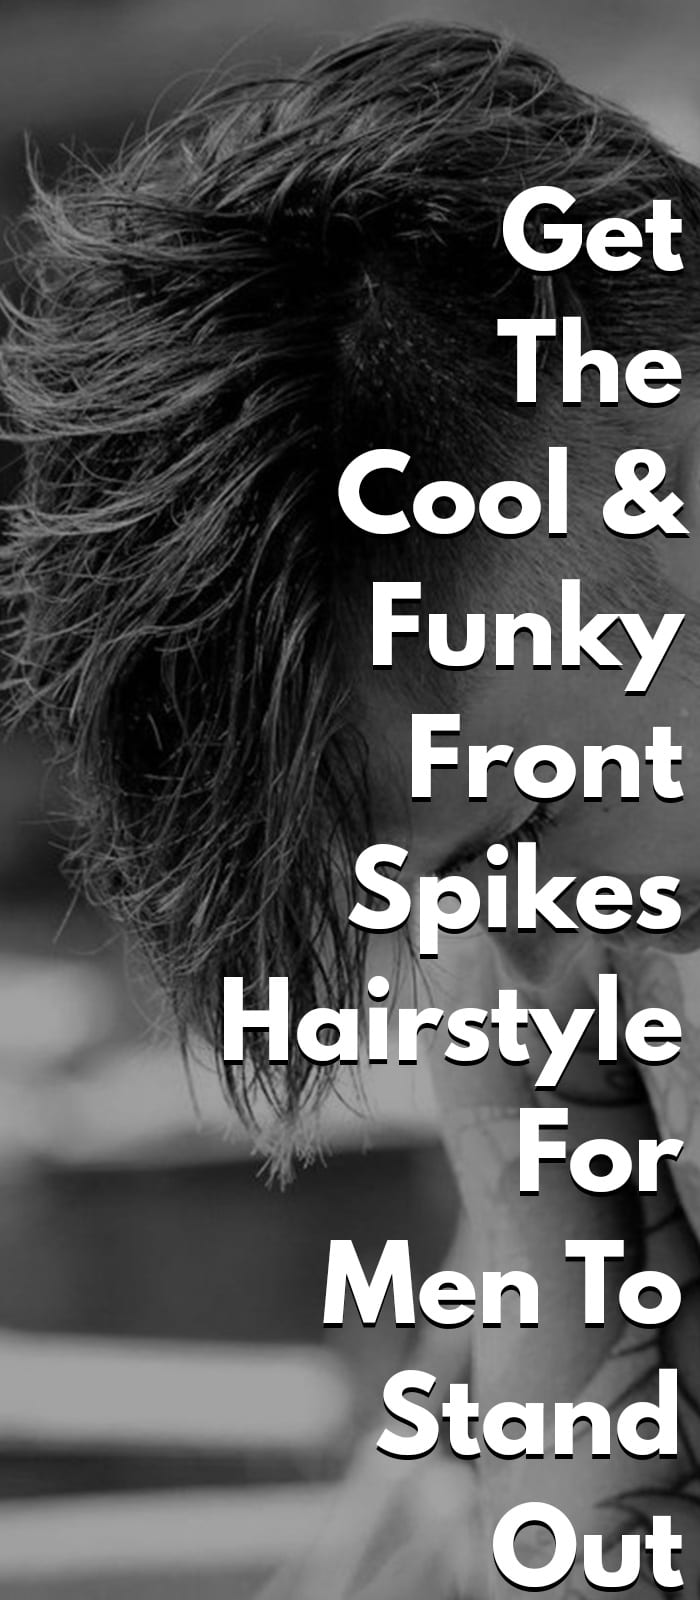 Funky Front Spikes Hairstyle For Men